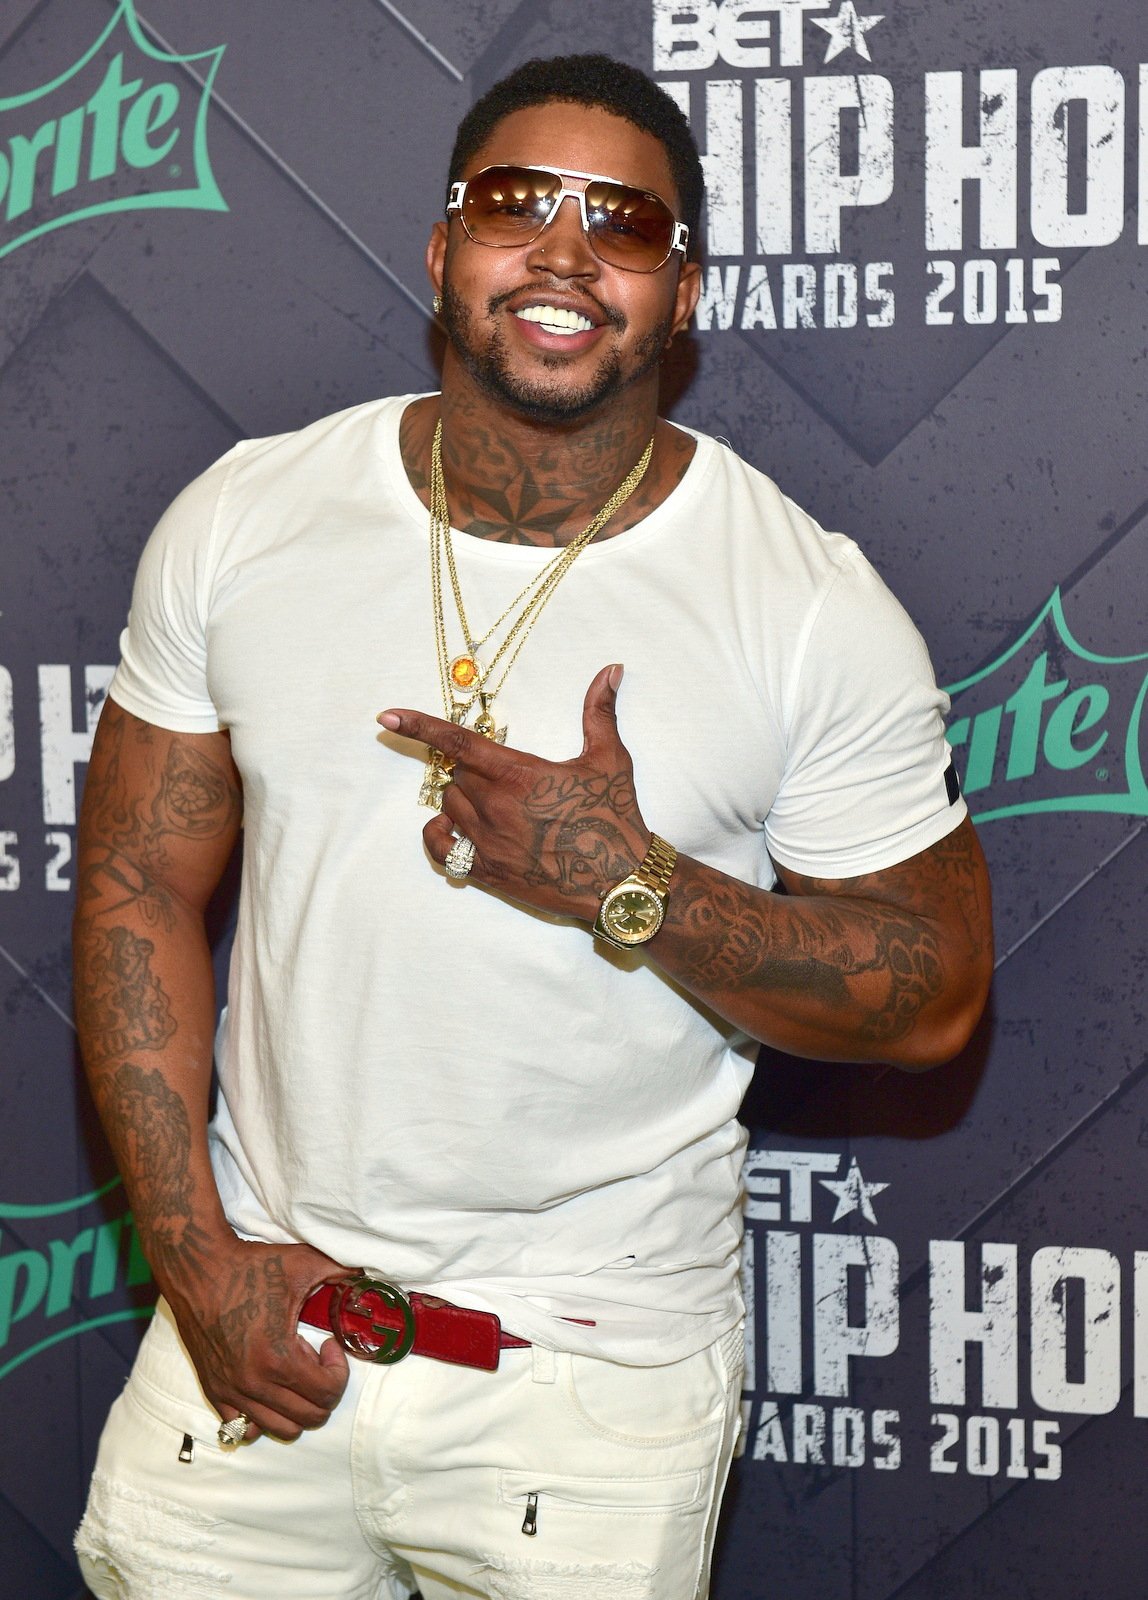  Lil Scrappy attends the 2015 BET Hip Hop awards at Boisfeuillet Jones Atlanta Civic Center on October 9, 2015 in Atlanta, Georgia | Photo: Getty Images